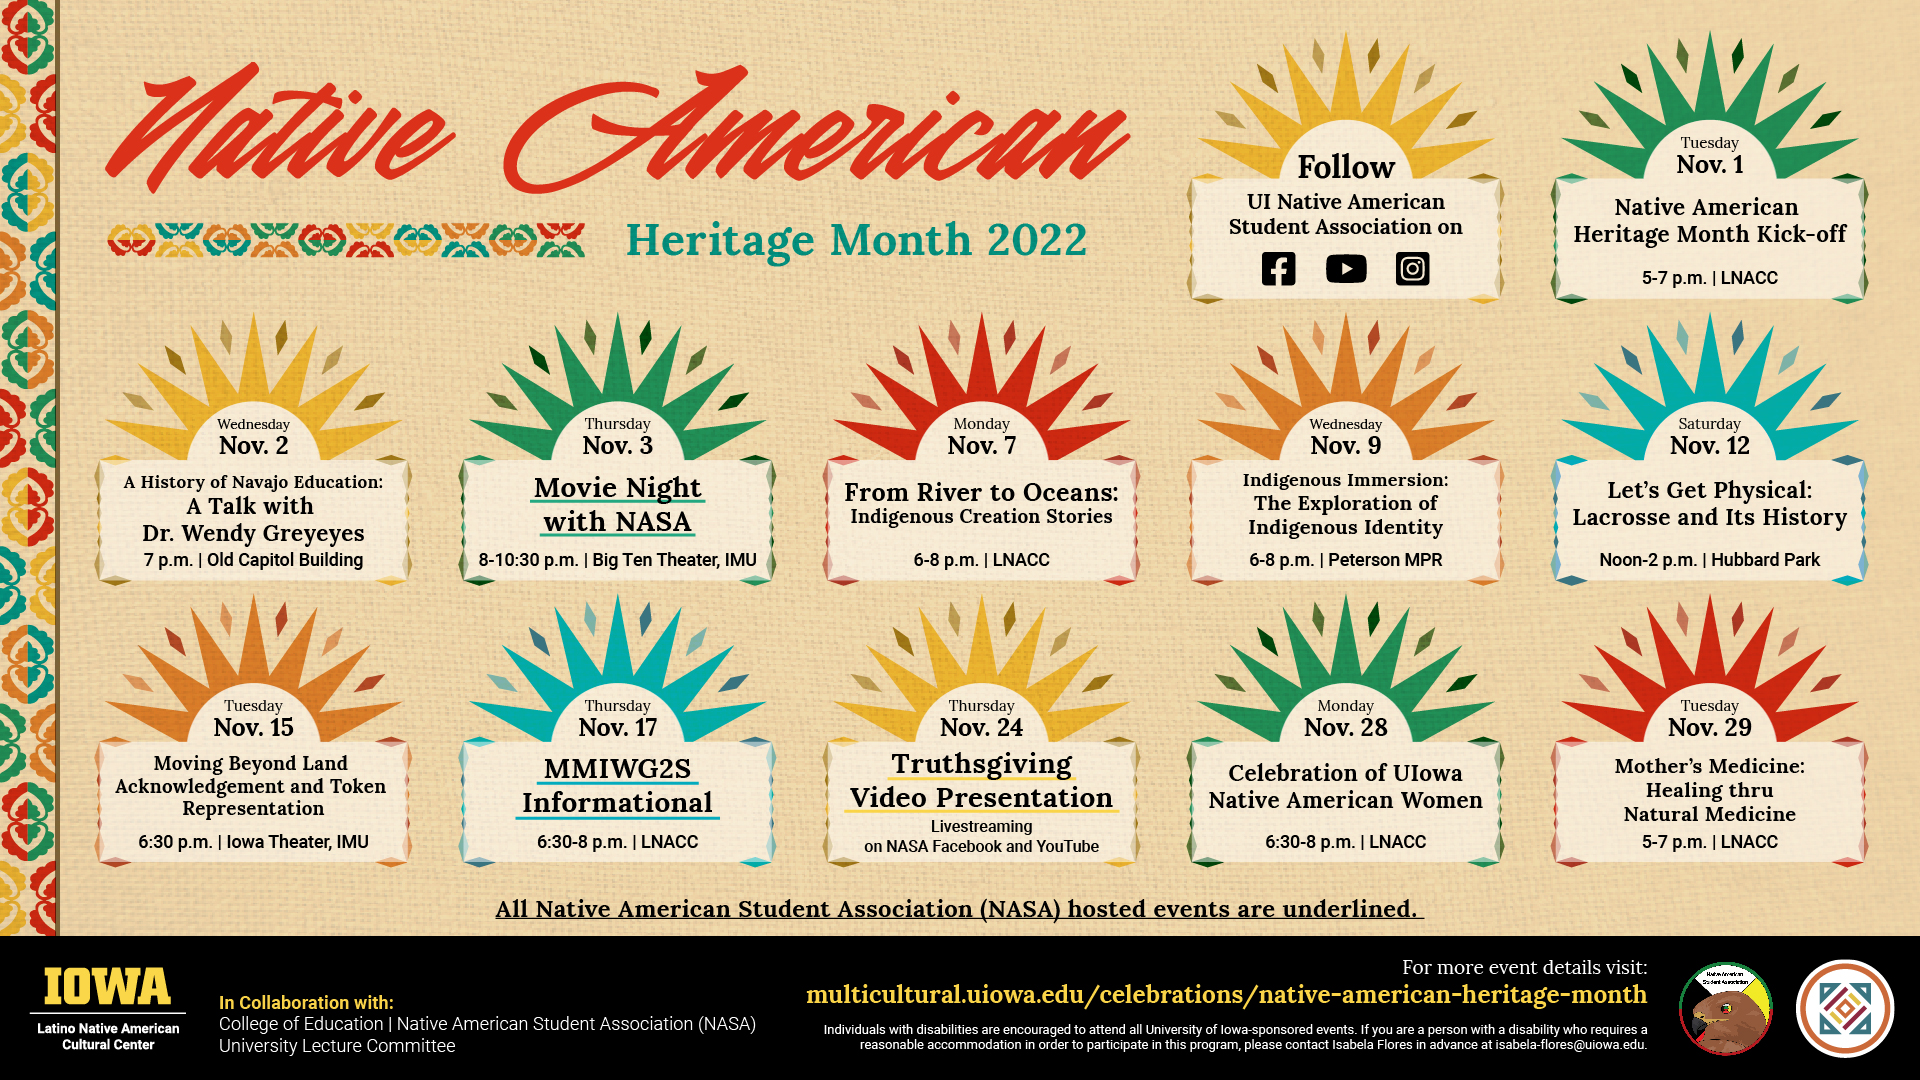 Calendar of events for Native American Heritage Month